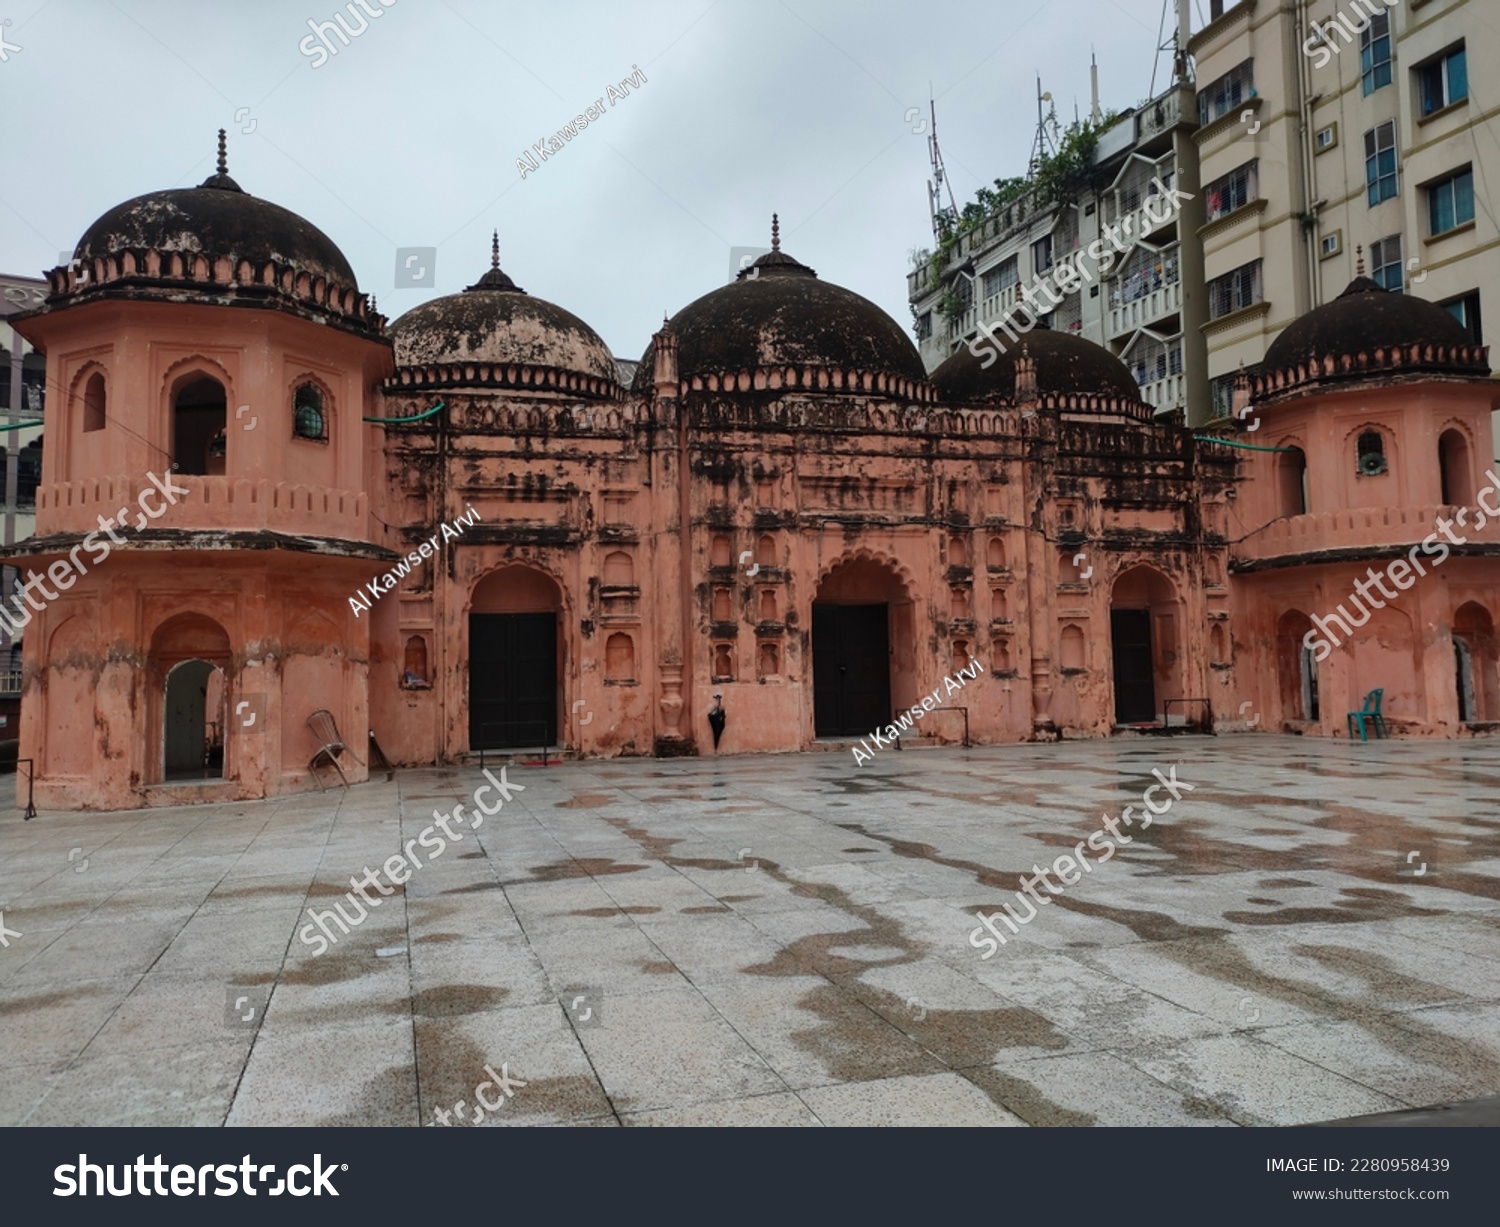 Seven Dome Mosque is built during the Mughal period in Mohammadpur, Dhaka. This mosque is named 'Satgambuj Masjid' because of its seven domes. It is one of the landmarks of the Mughal Empire. #2280958439